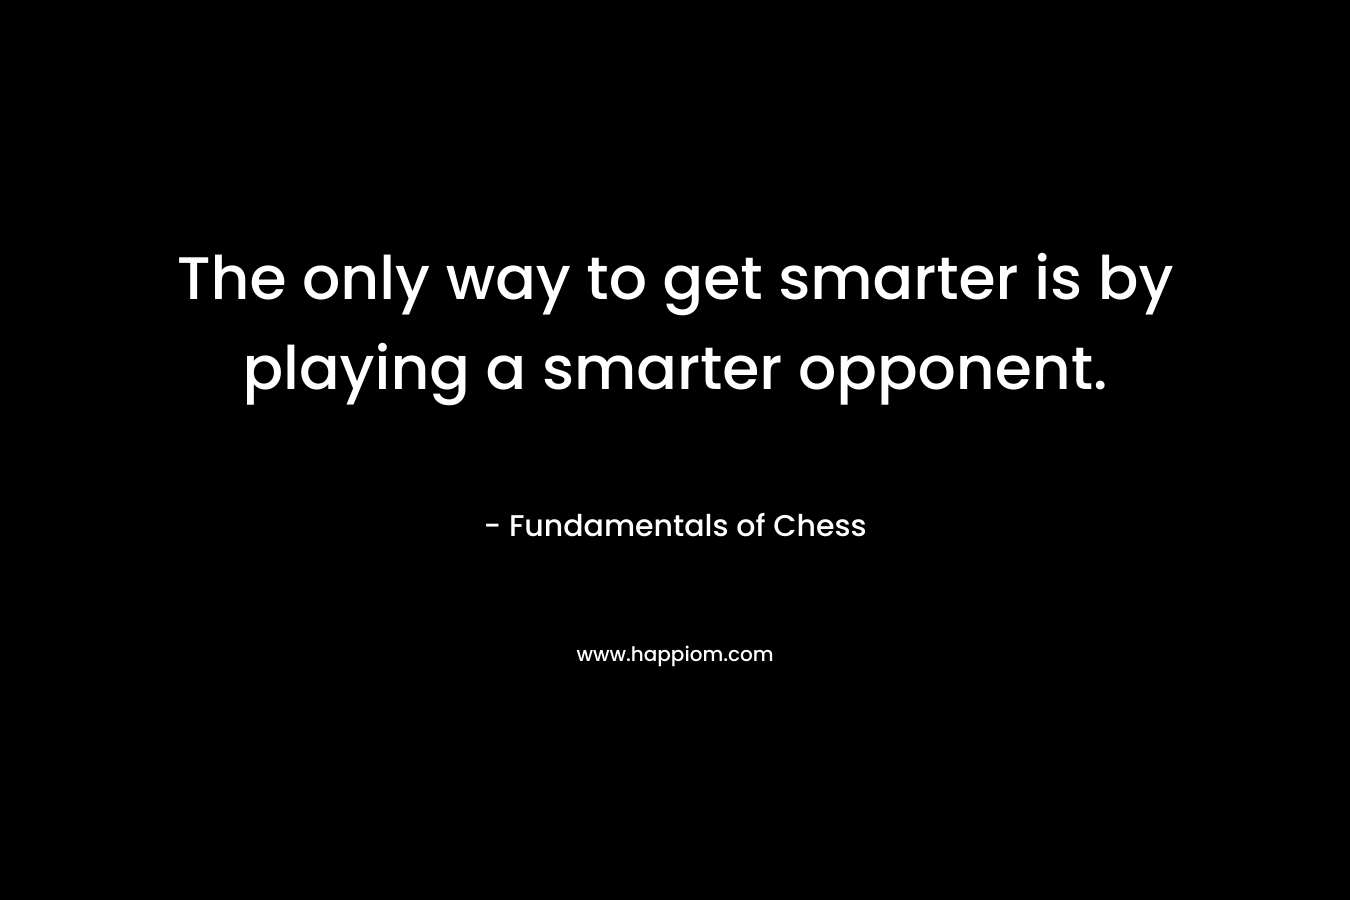 The only way to get smarter is by playing a smarter opponent.